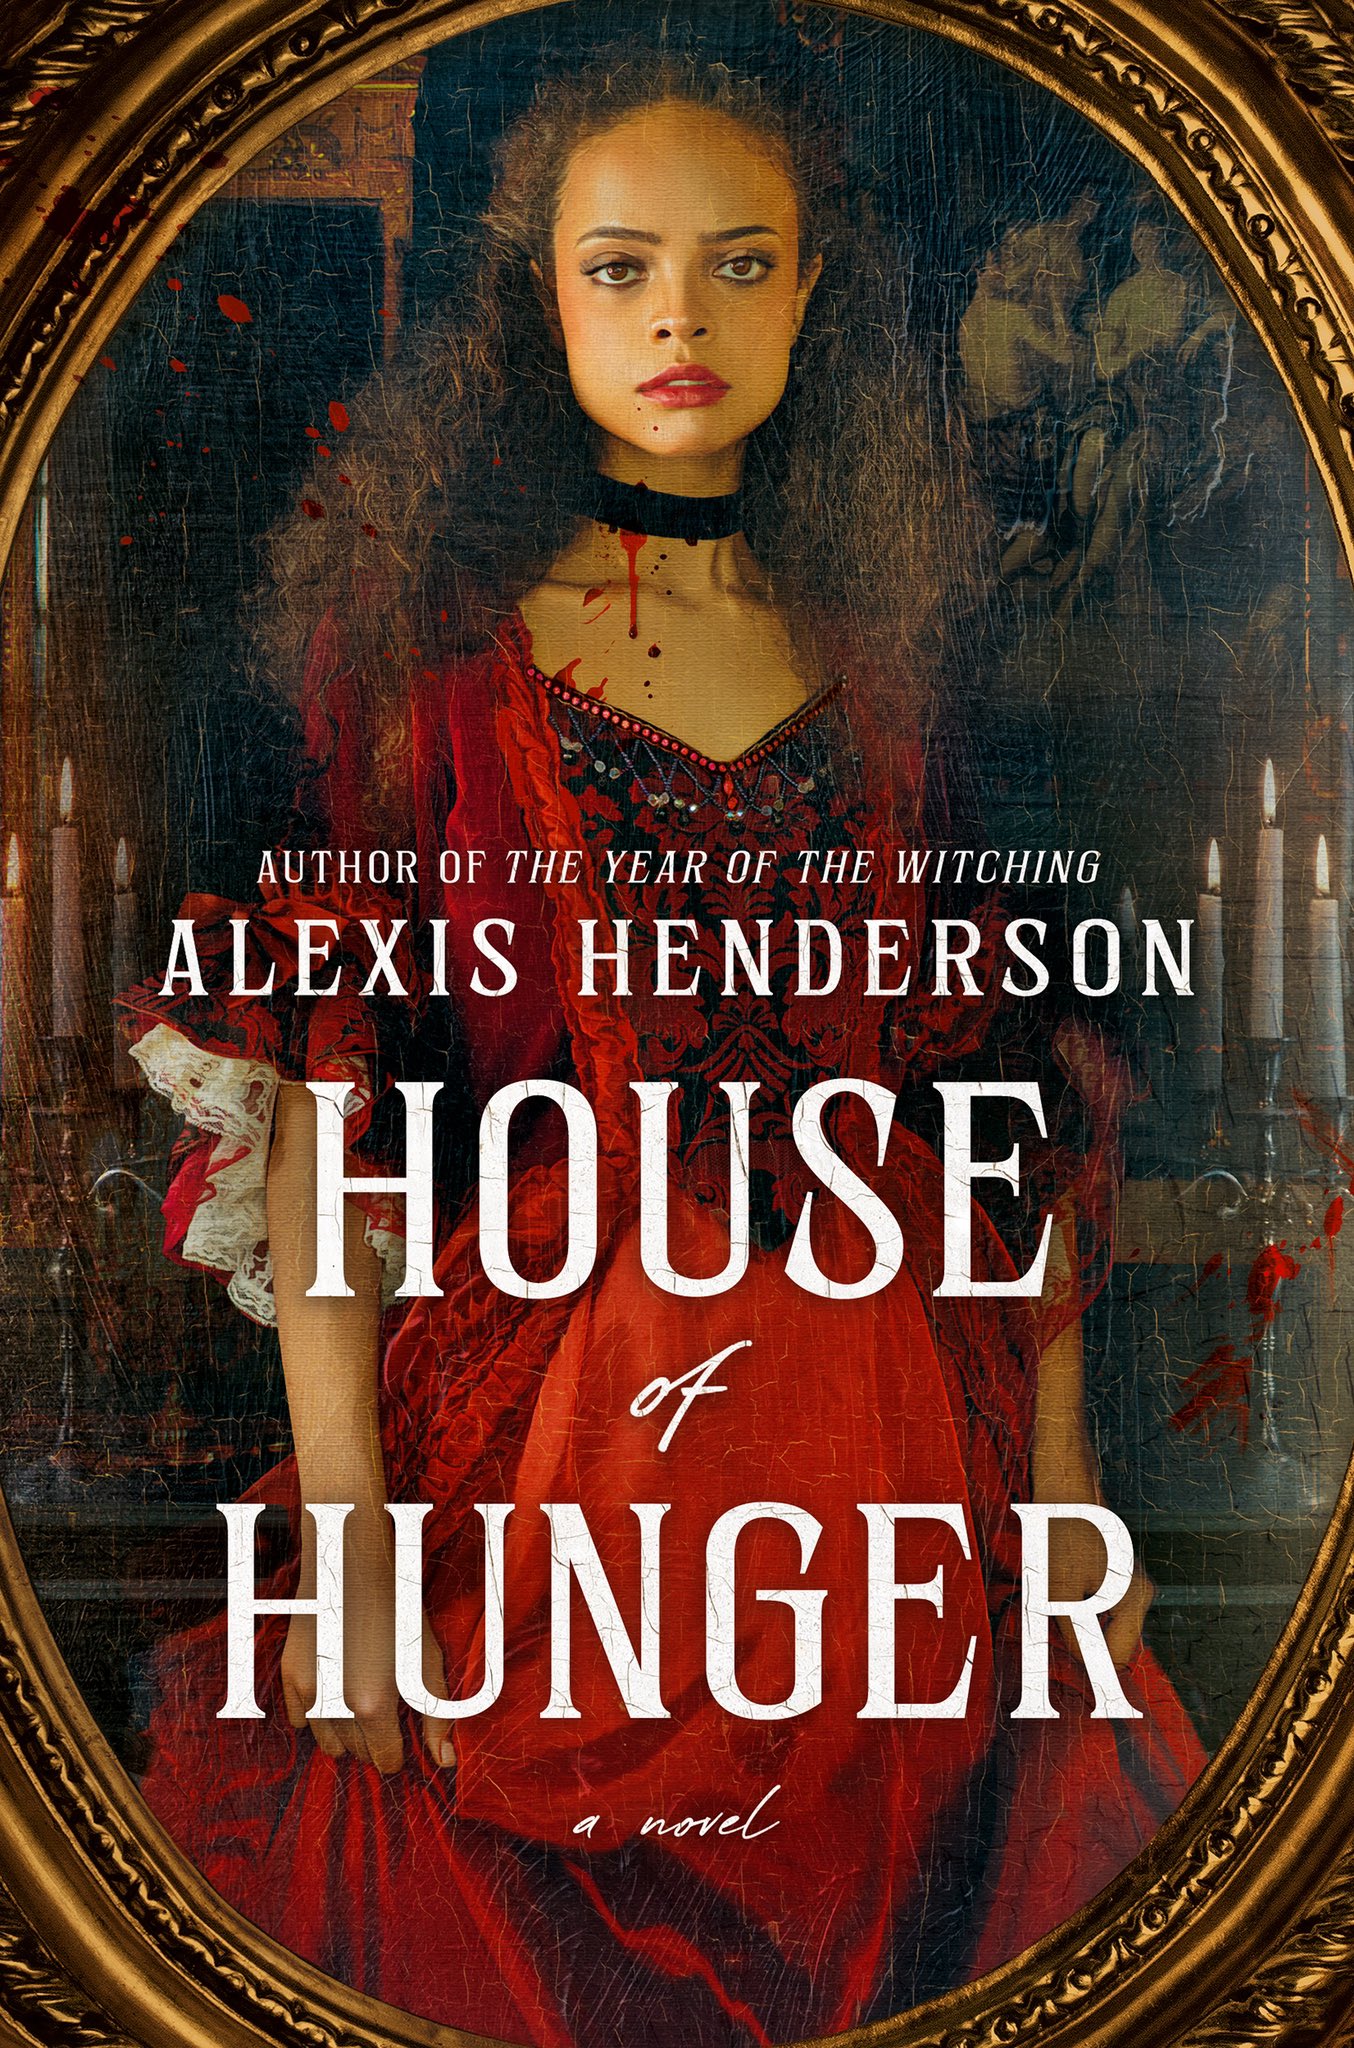 House of Hunger by Alexis Henderson PDF Download